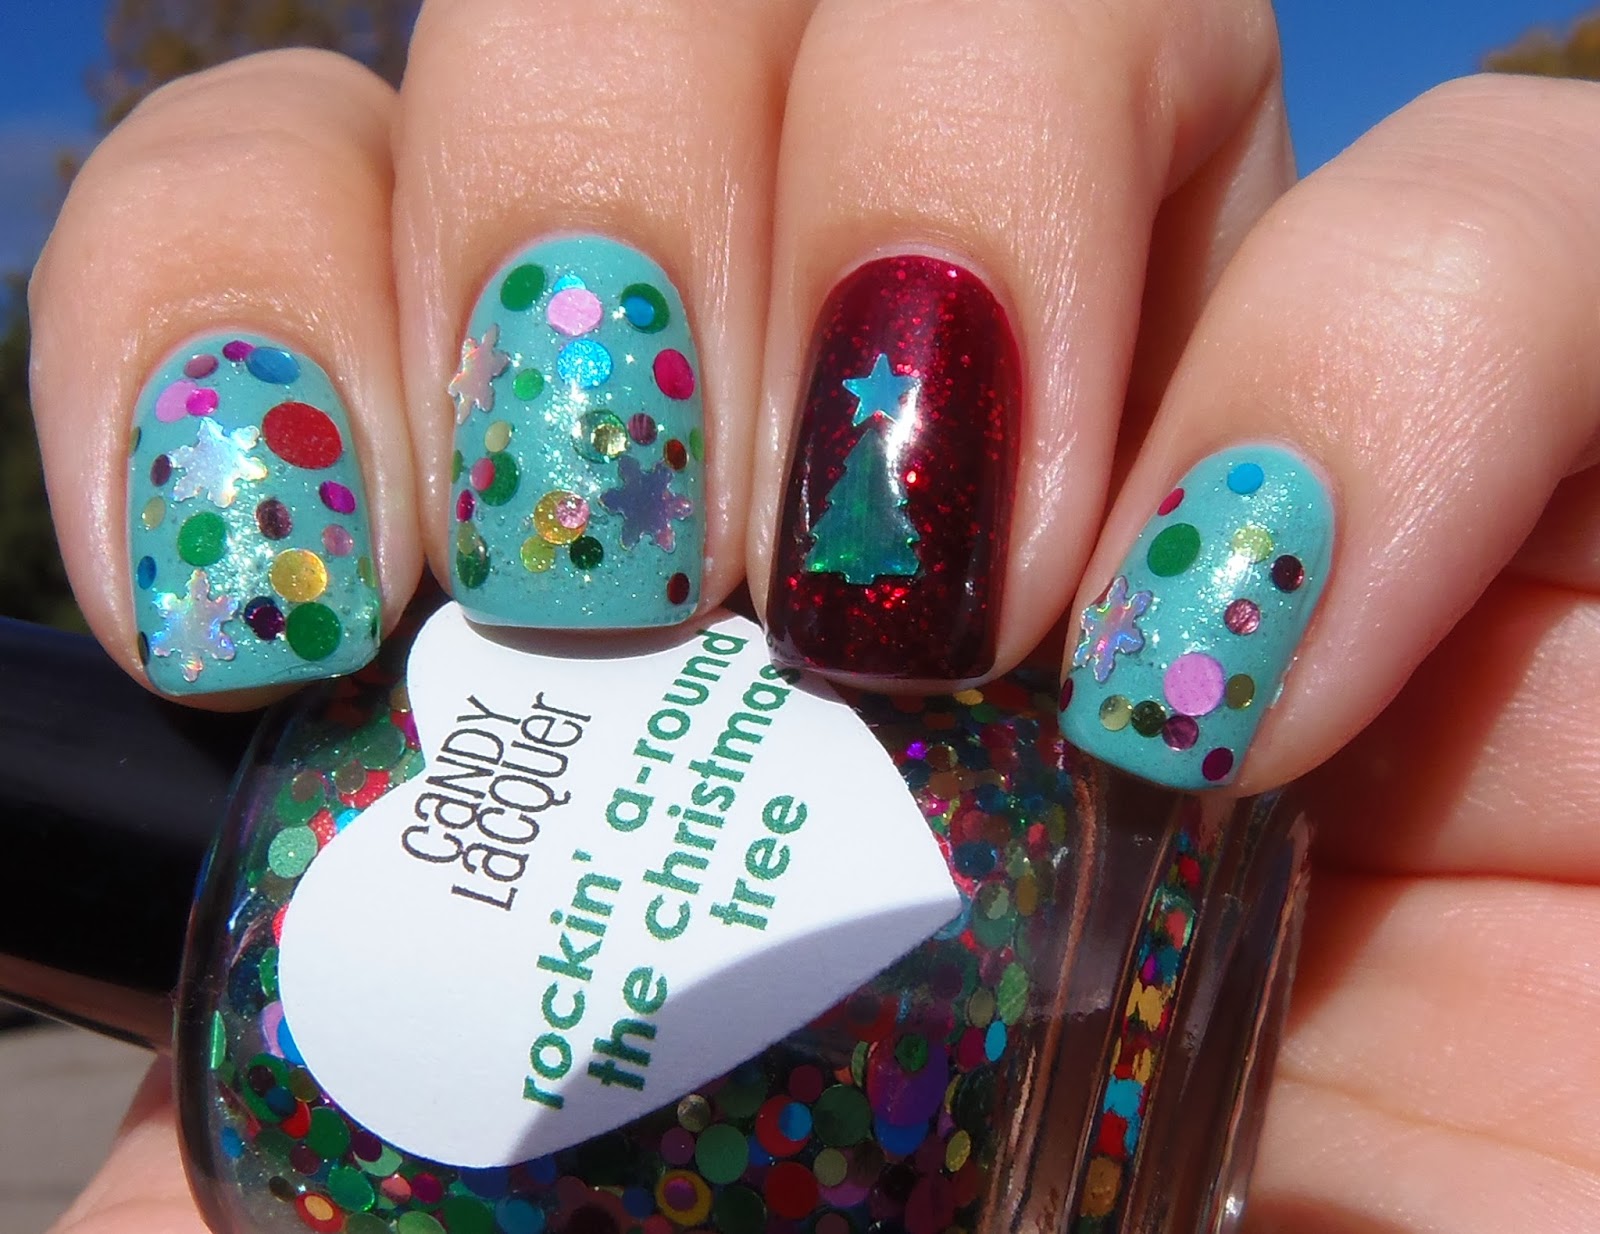 Sparkly Vernis: Festive Aqua Glitter Bomb with Red accent